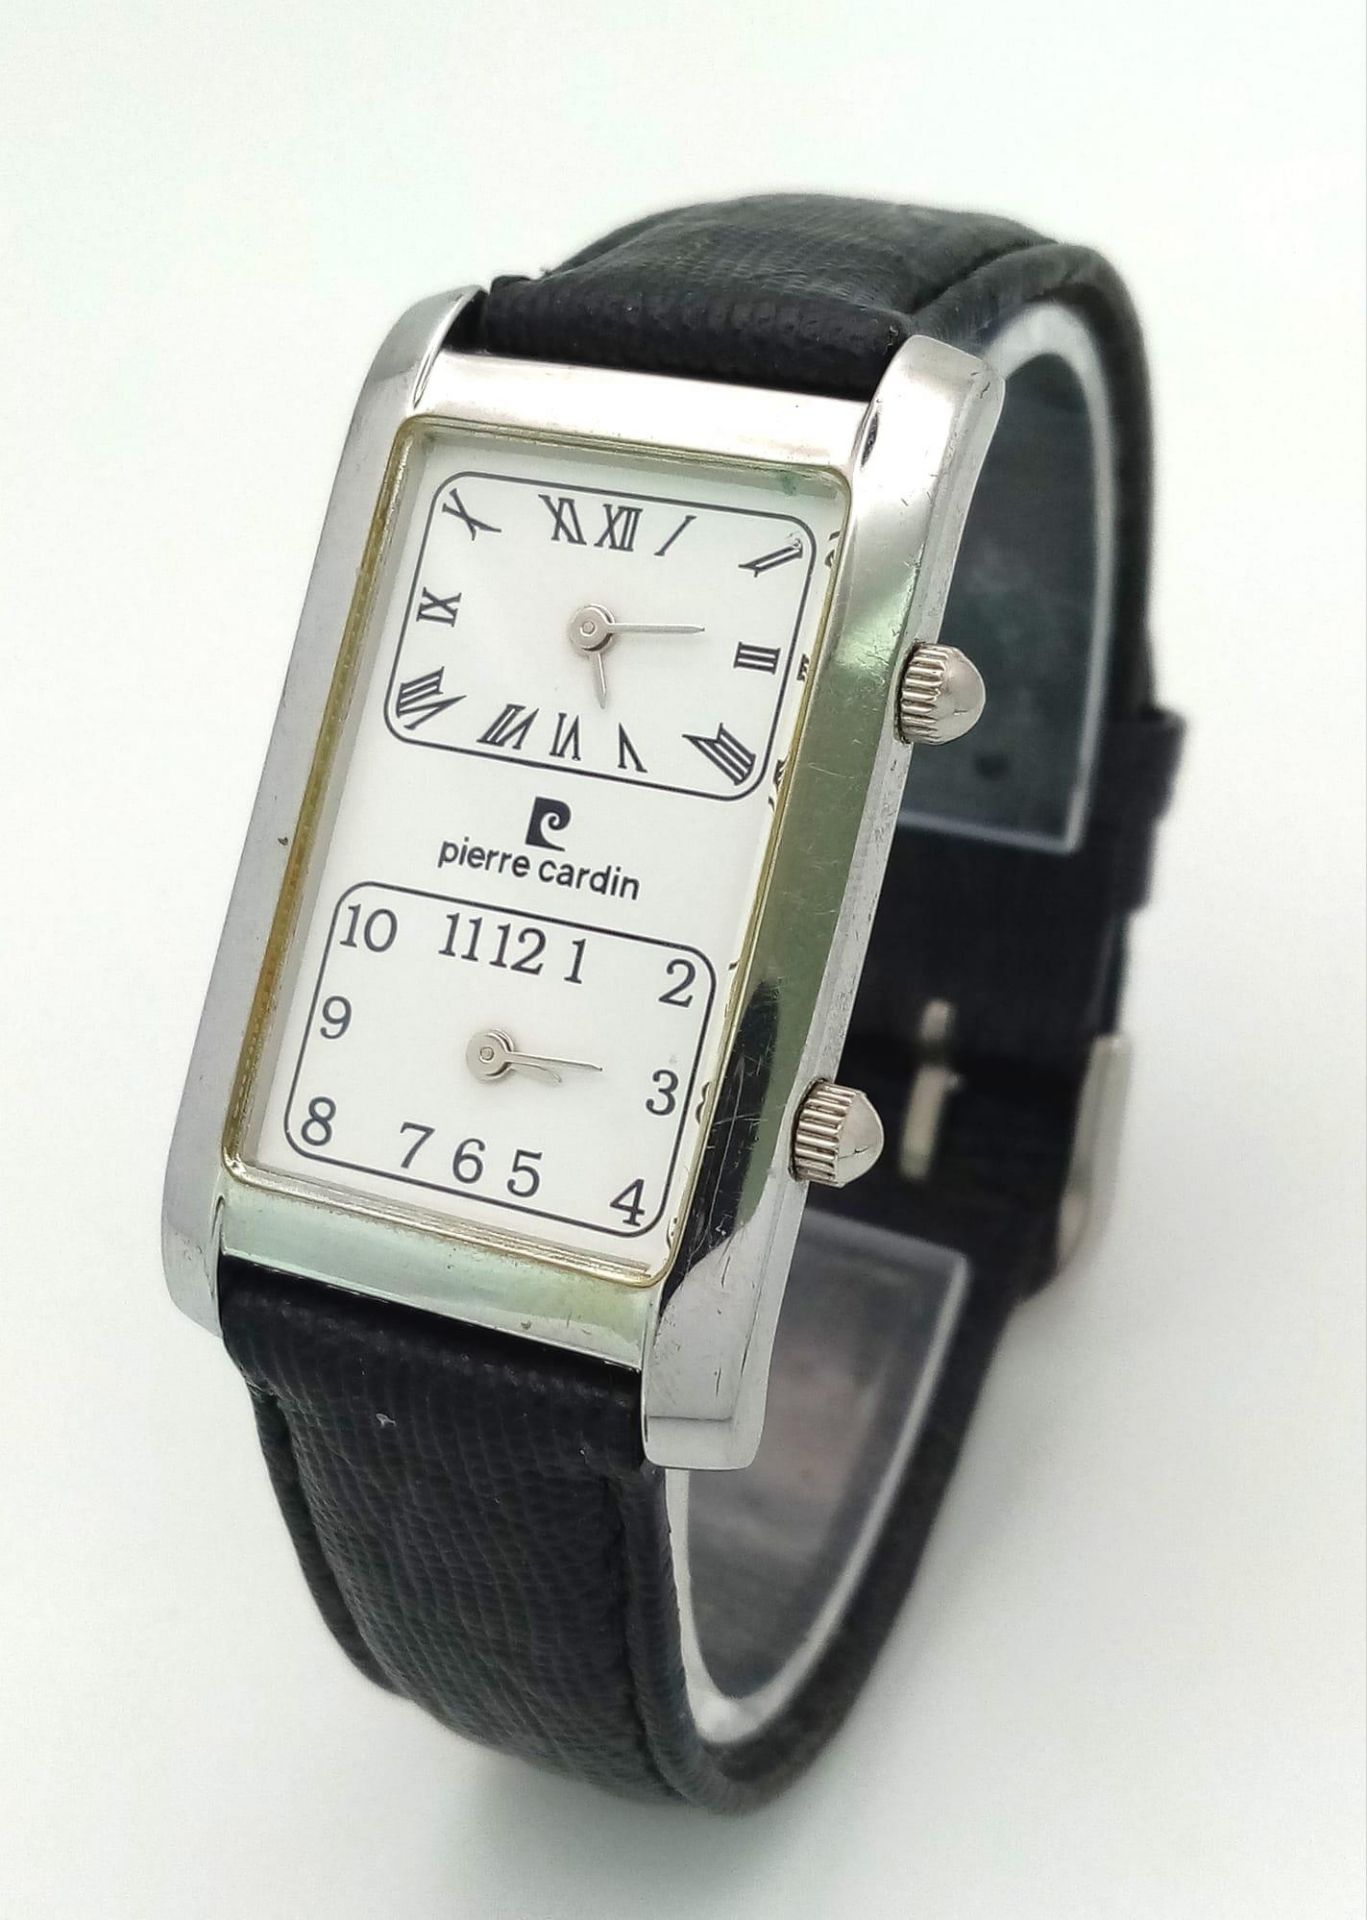 A Vintage Pierre Cardin Dual Time Quartz Watch. Black leather strap. Elongated case. In working